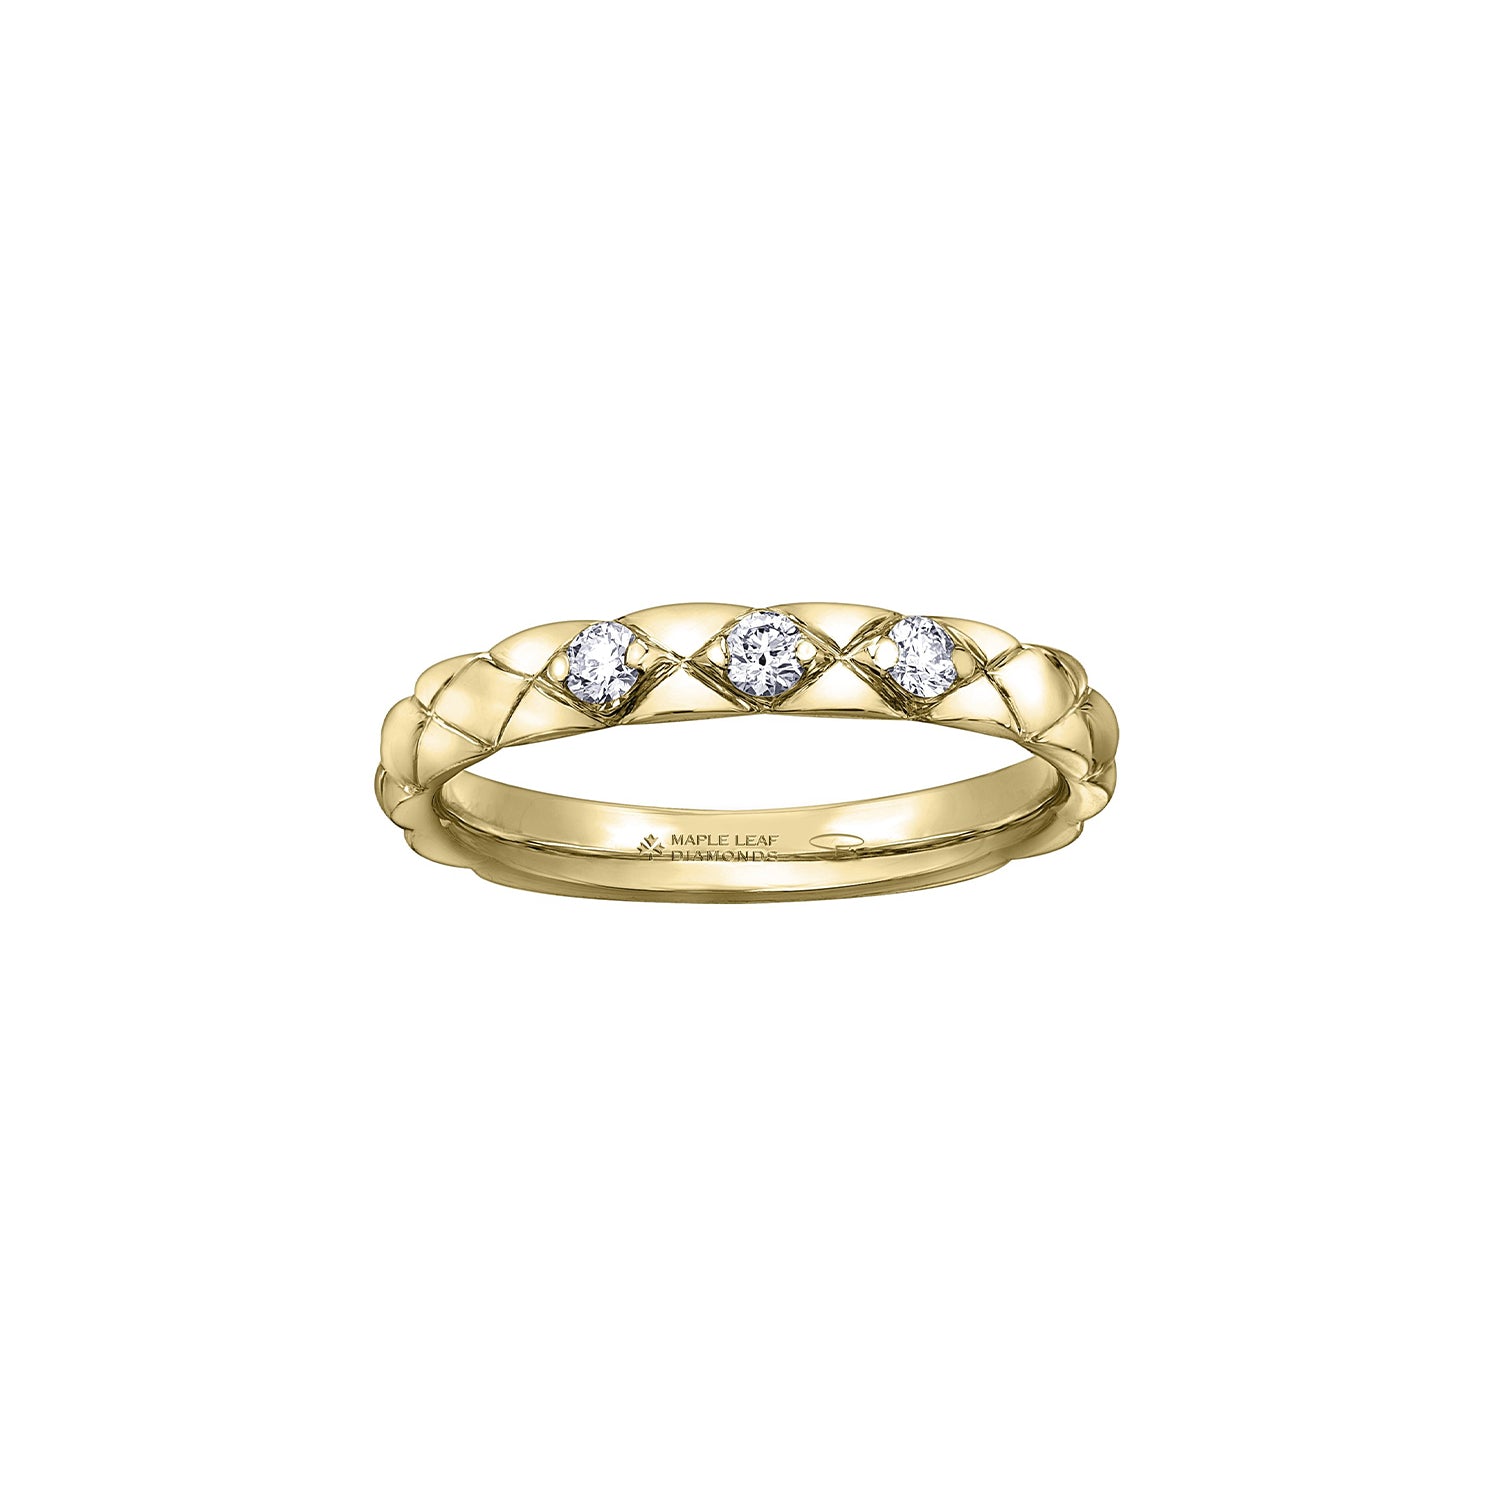 Crafted in 14KT yellow Certified Canadian Gold, this quilted band is set with three round brilliant-cut Canadian diamonds. 